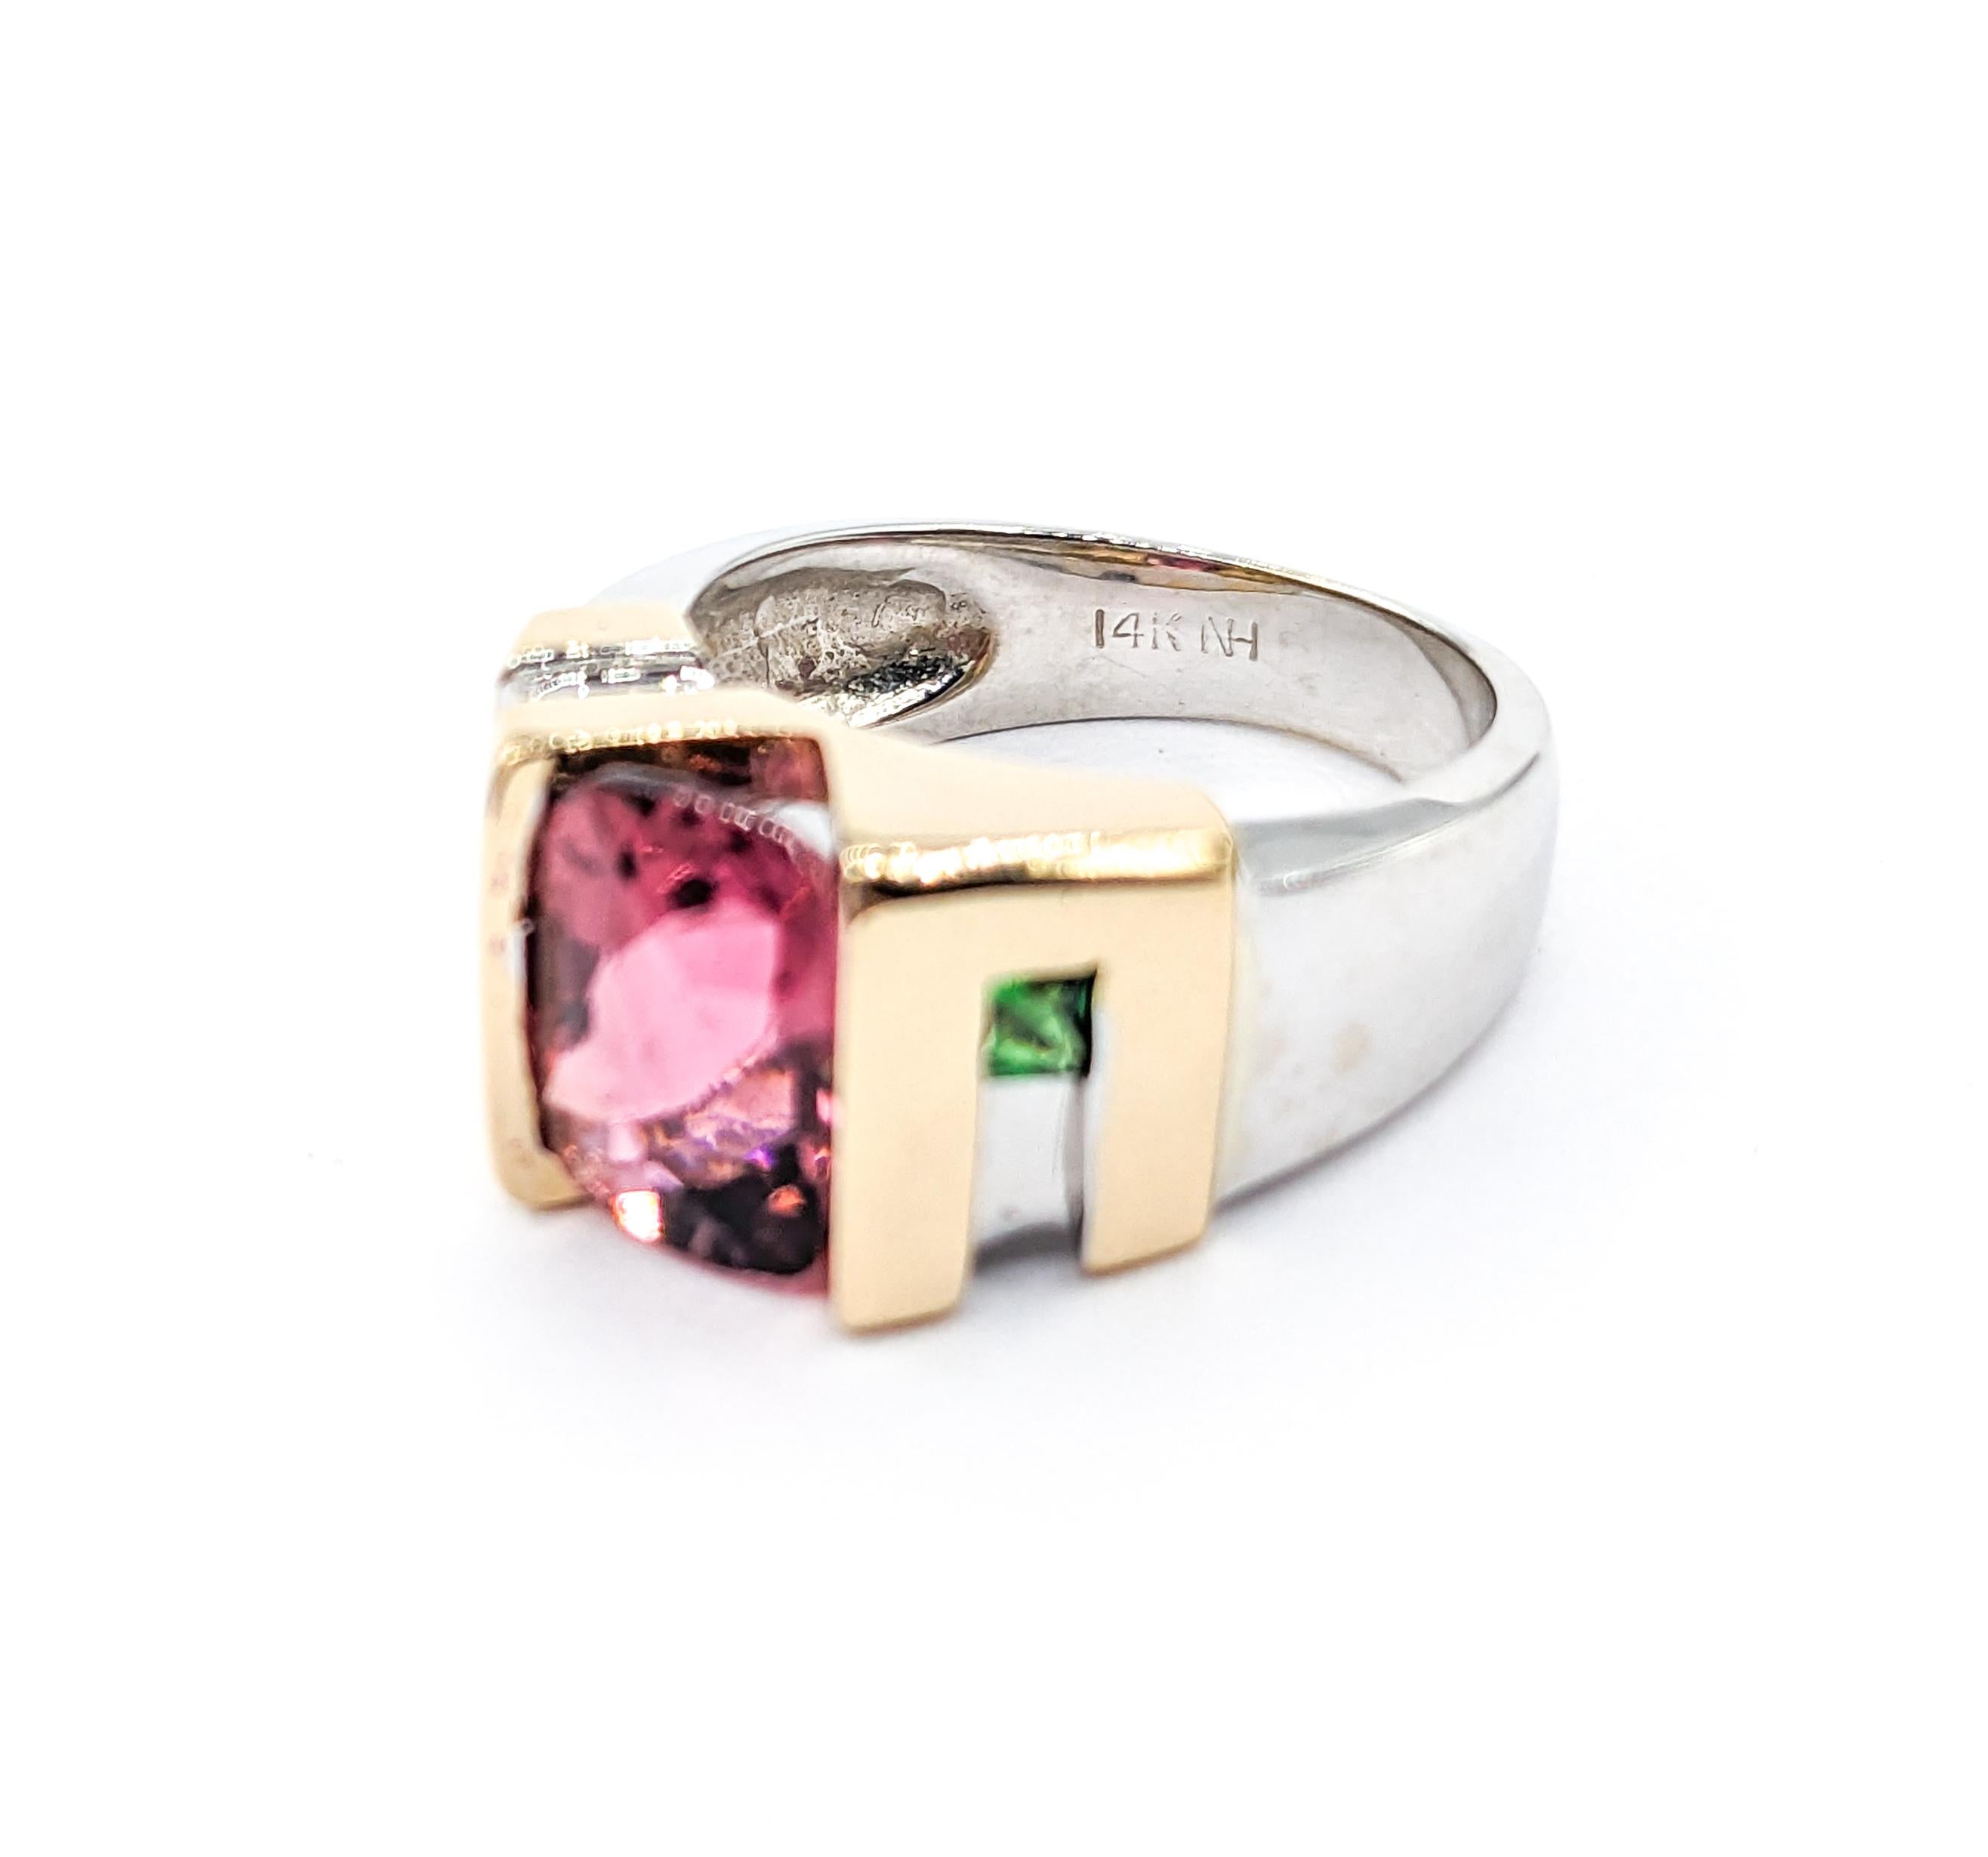 3.10ct cushion Pink Tourmaline & .18ctw Tsavorite Garnets Ring In Two-Tone Gold For Sale 1